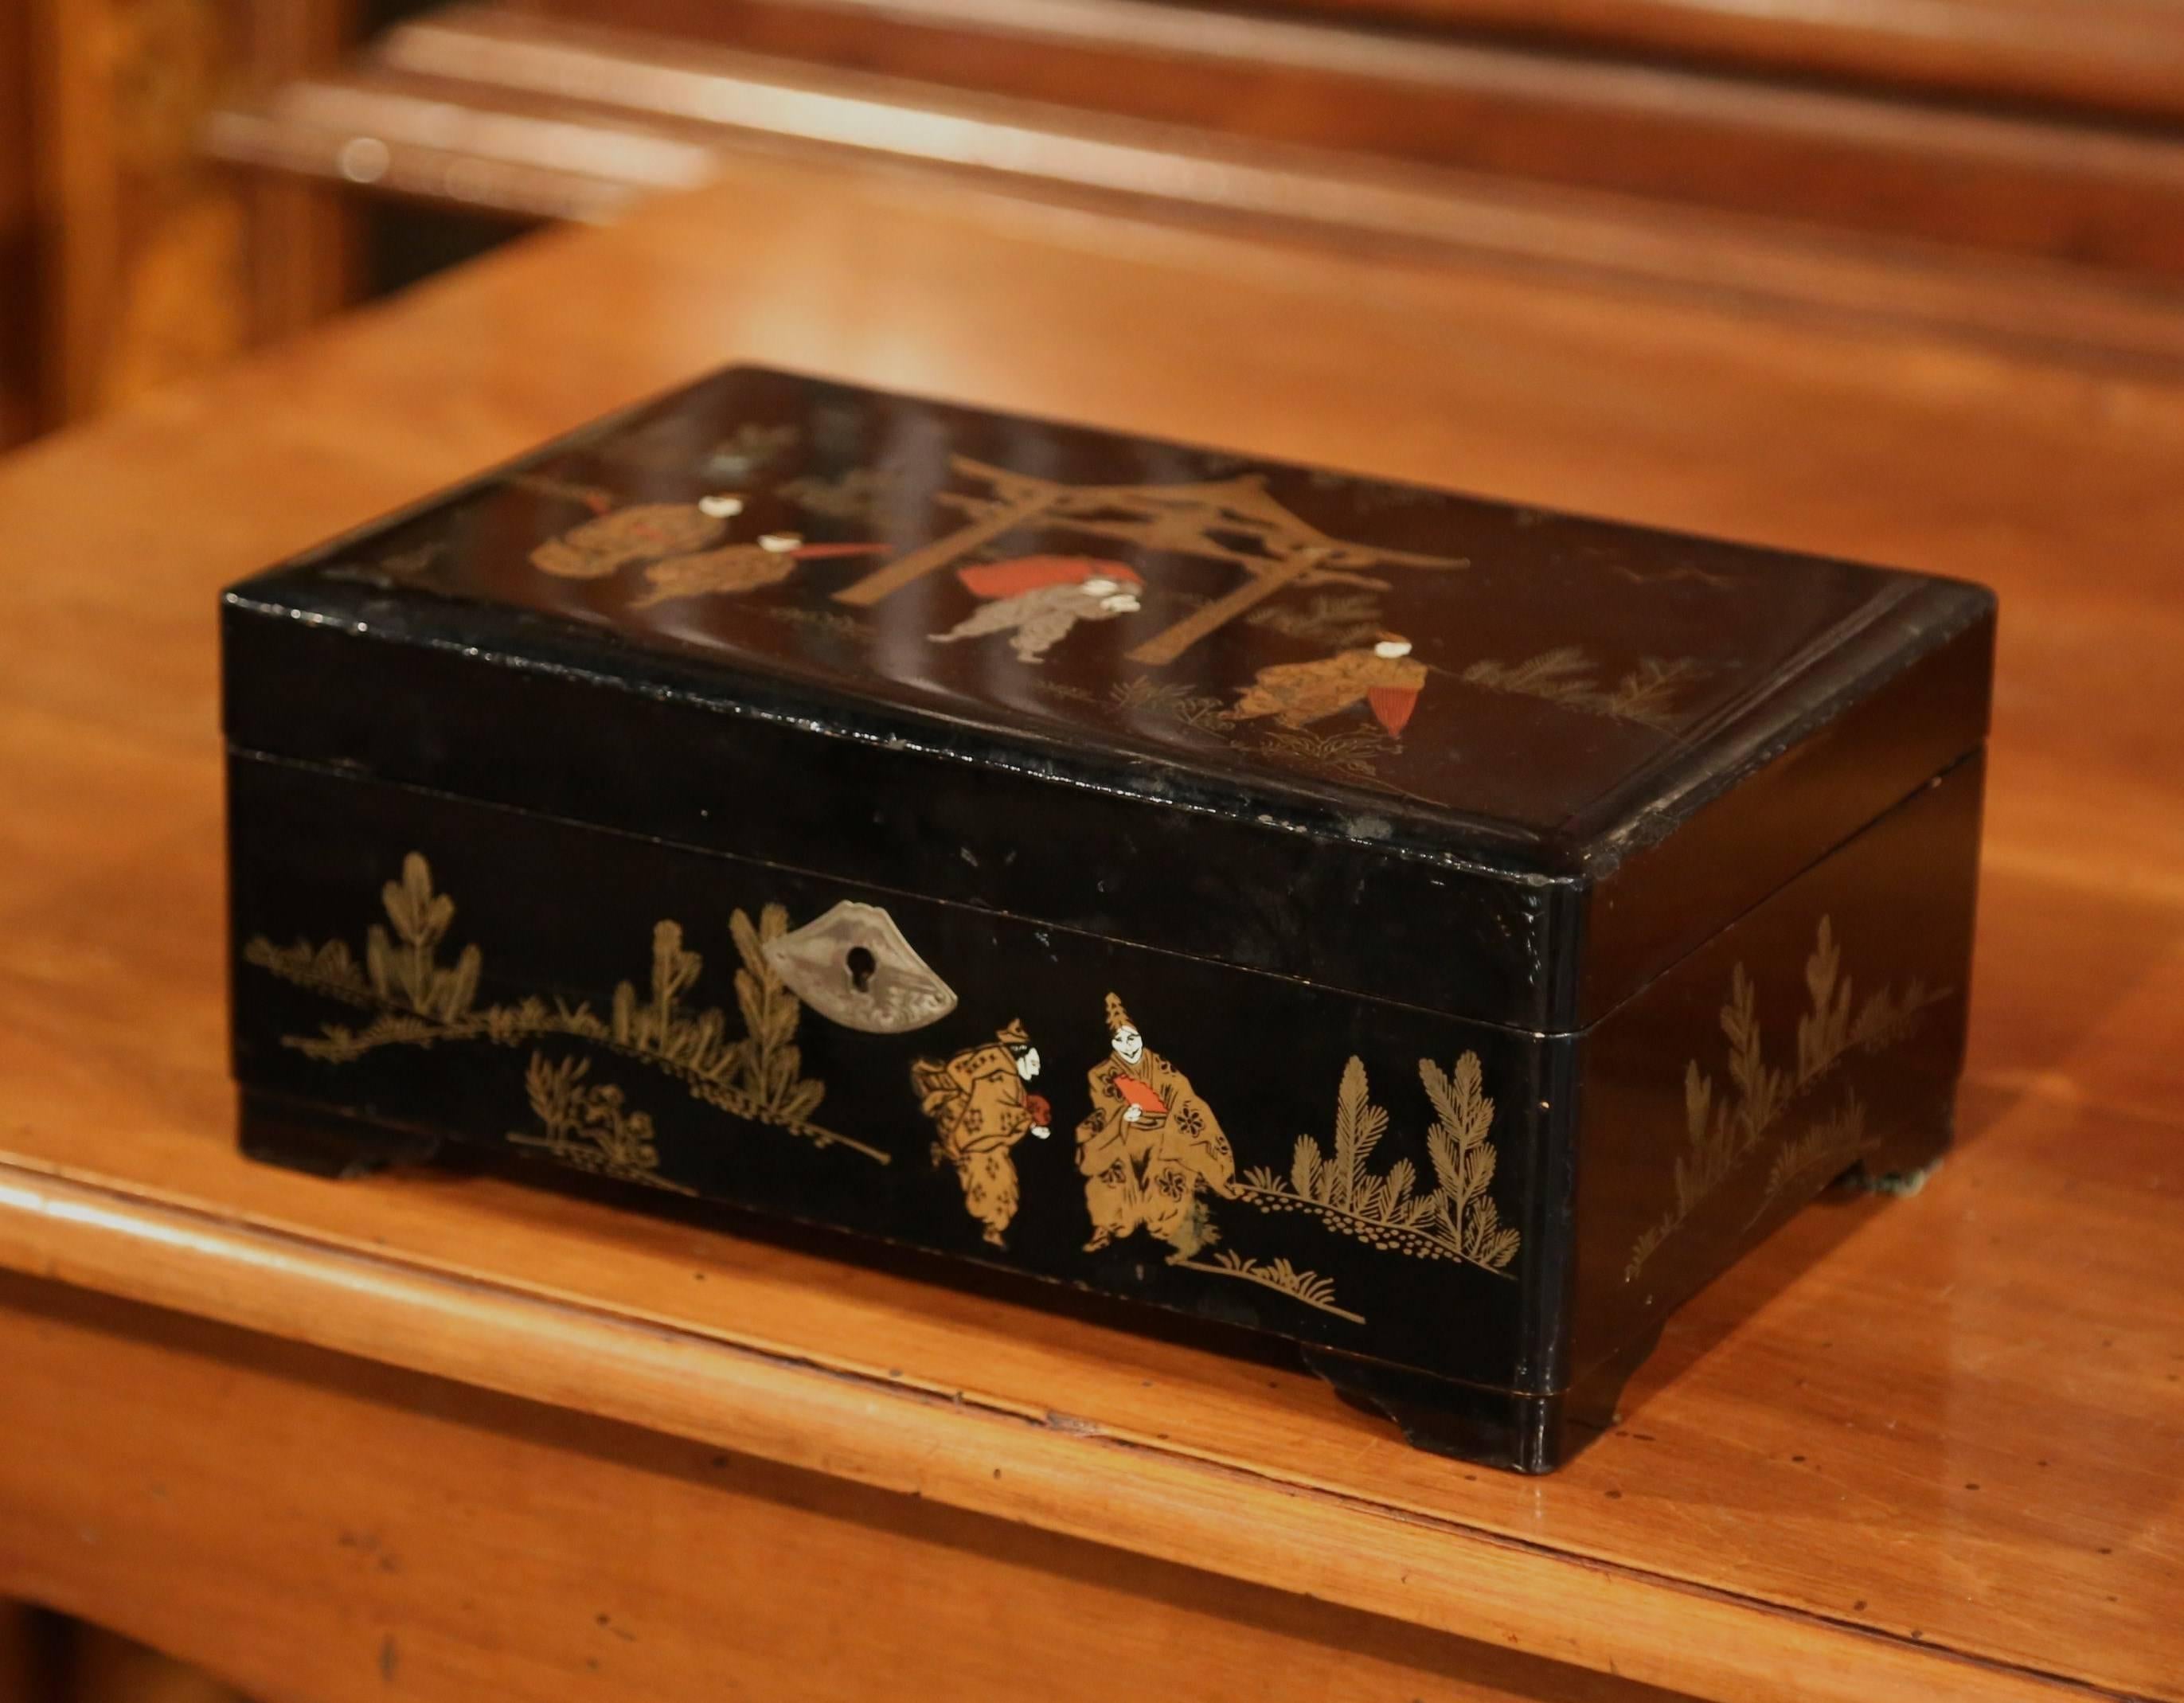 Top your vanity with this interesting makeup box; crafted in France, circa 1880, the black lacquered box is decorated on the outside with illustrative chinoiserie motifs embellished with gold and silver leaf accents. Inside, is a music box in